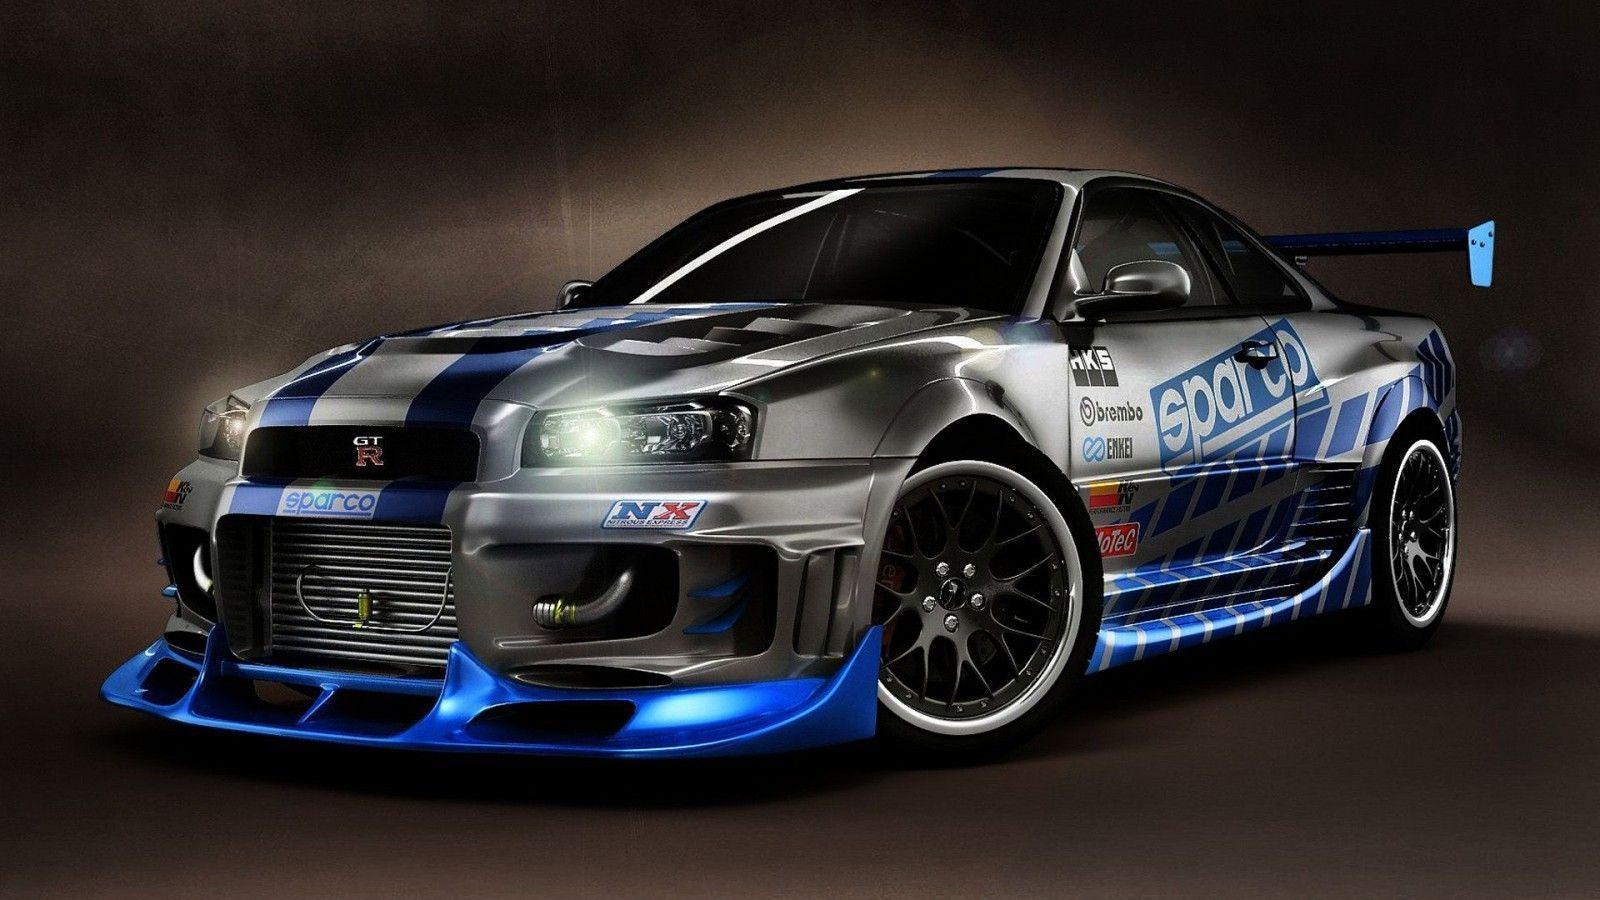 Furious Cars Wallpaper Free Furious Cars Background